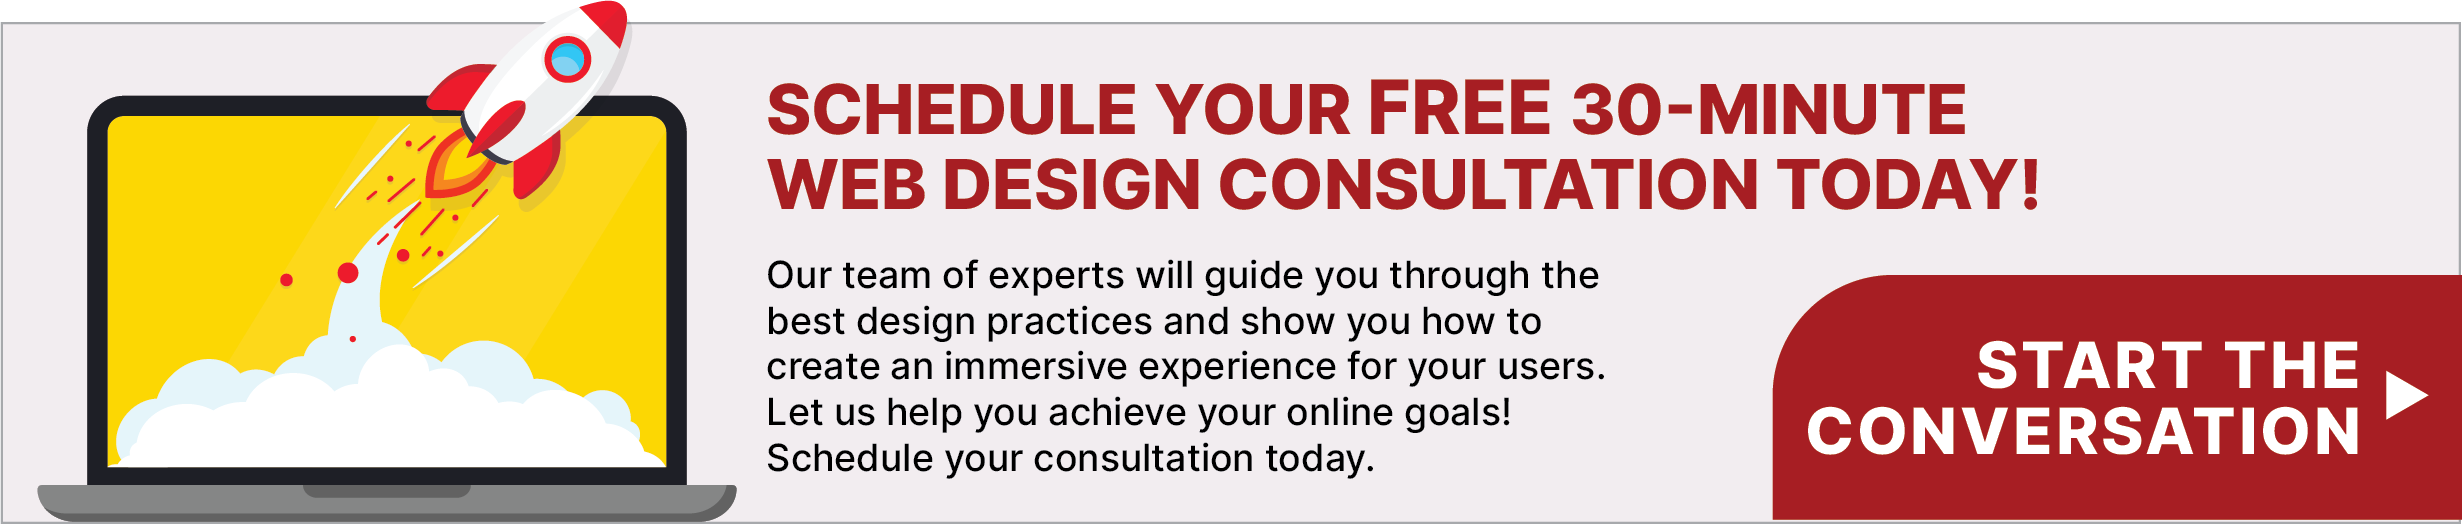 Button inviting readers to schedule a 30-minute consultation about industrial web design with the web design experts at IQnection.